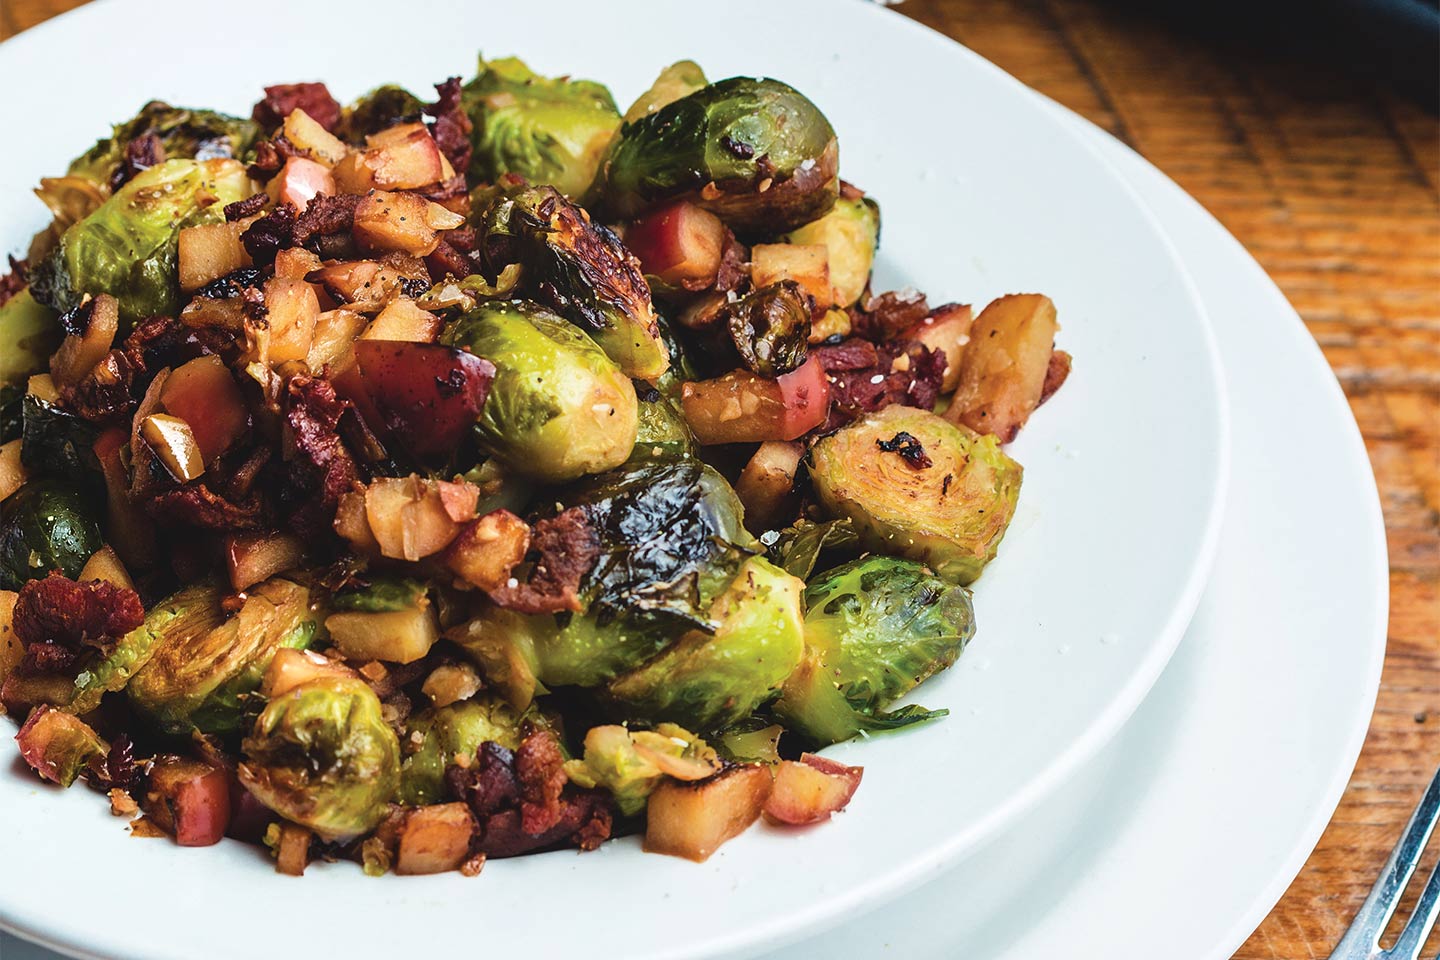 brussells sprouts with gala apples from feed co. table and tavern